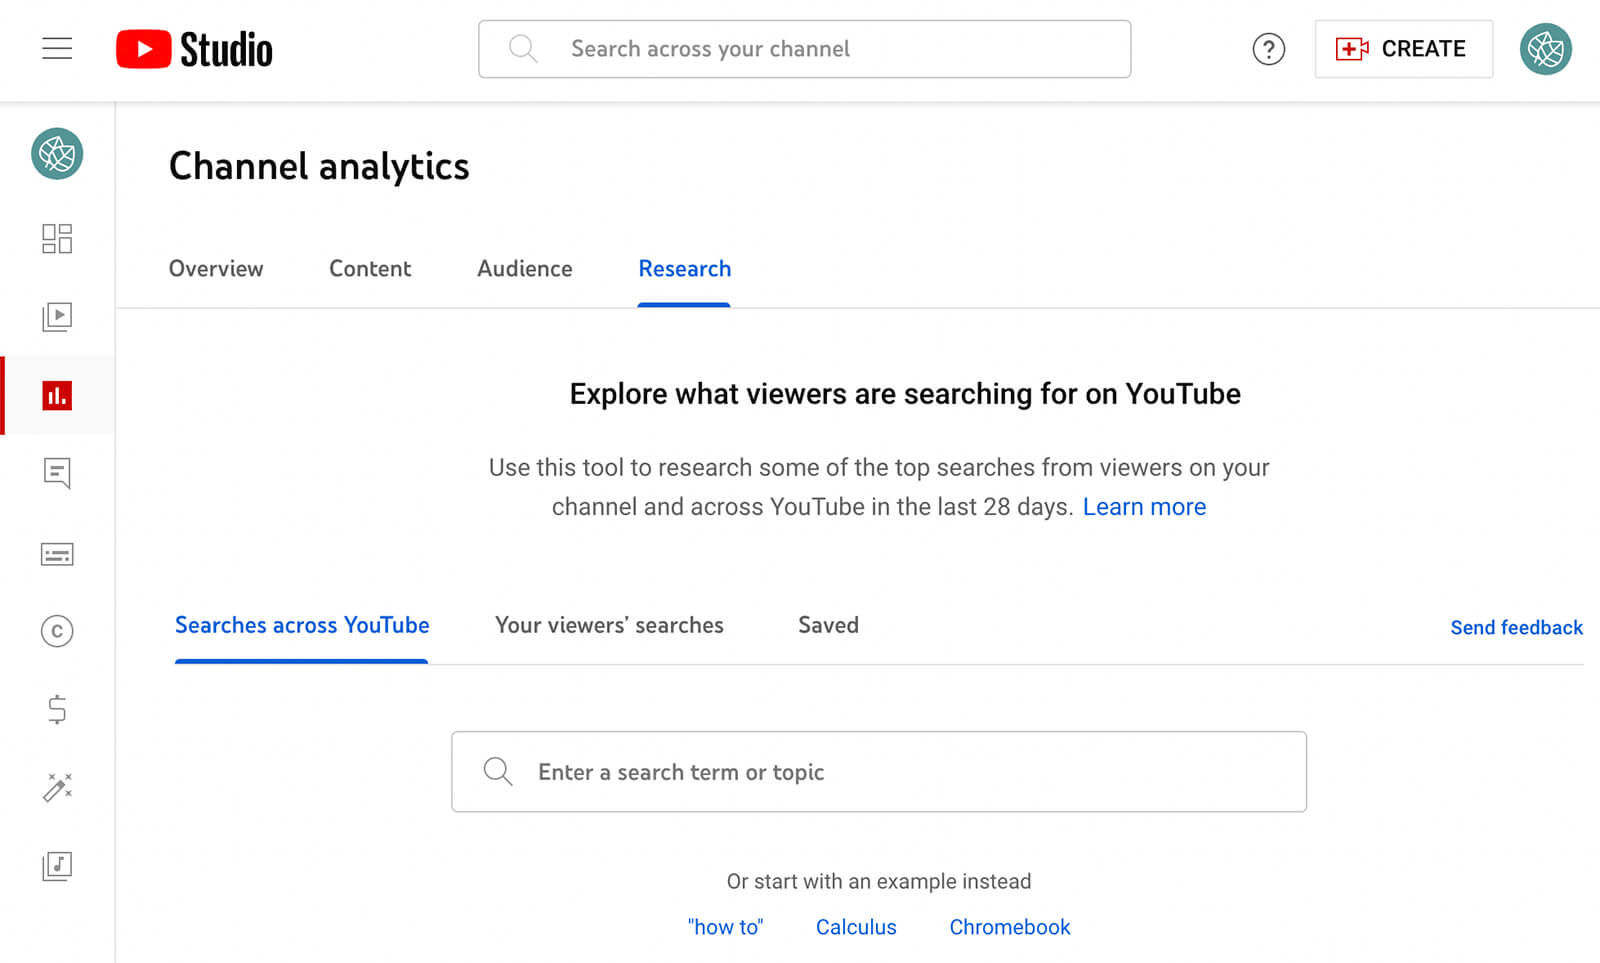 youtube-research-insights-tool-studio-channel-analytics-2